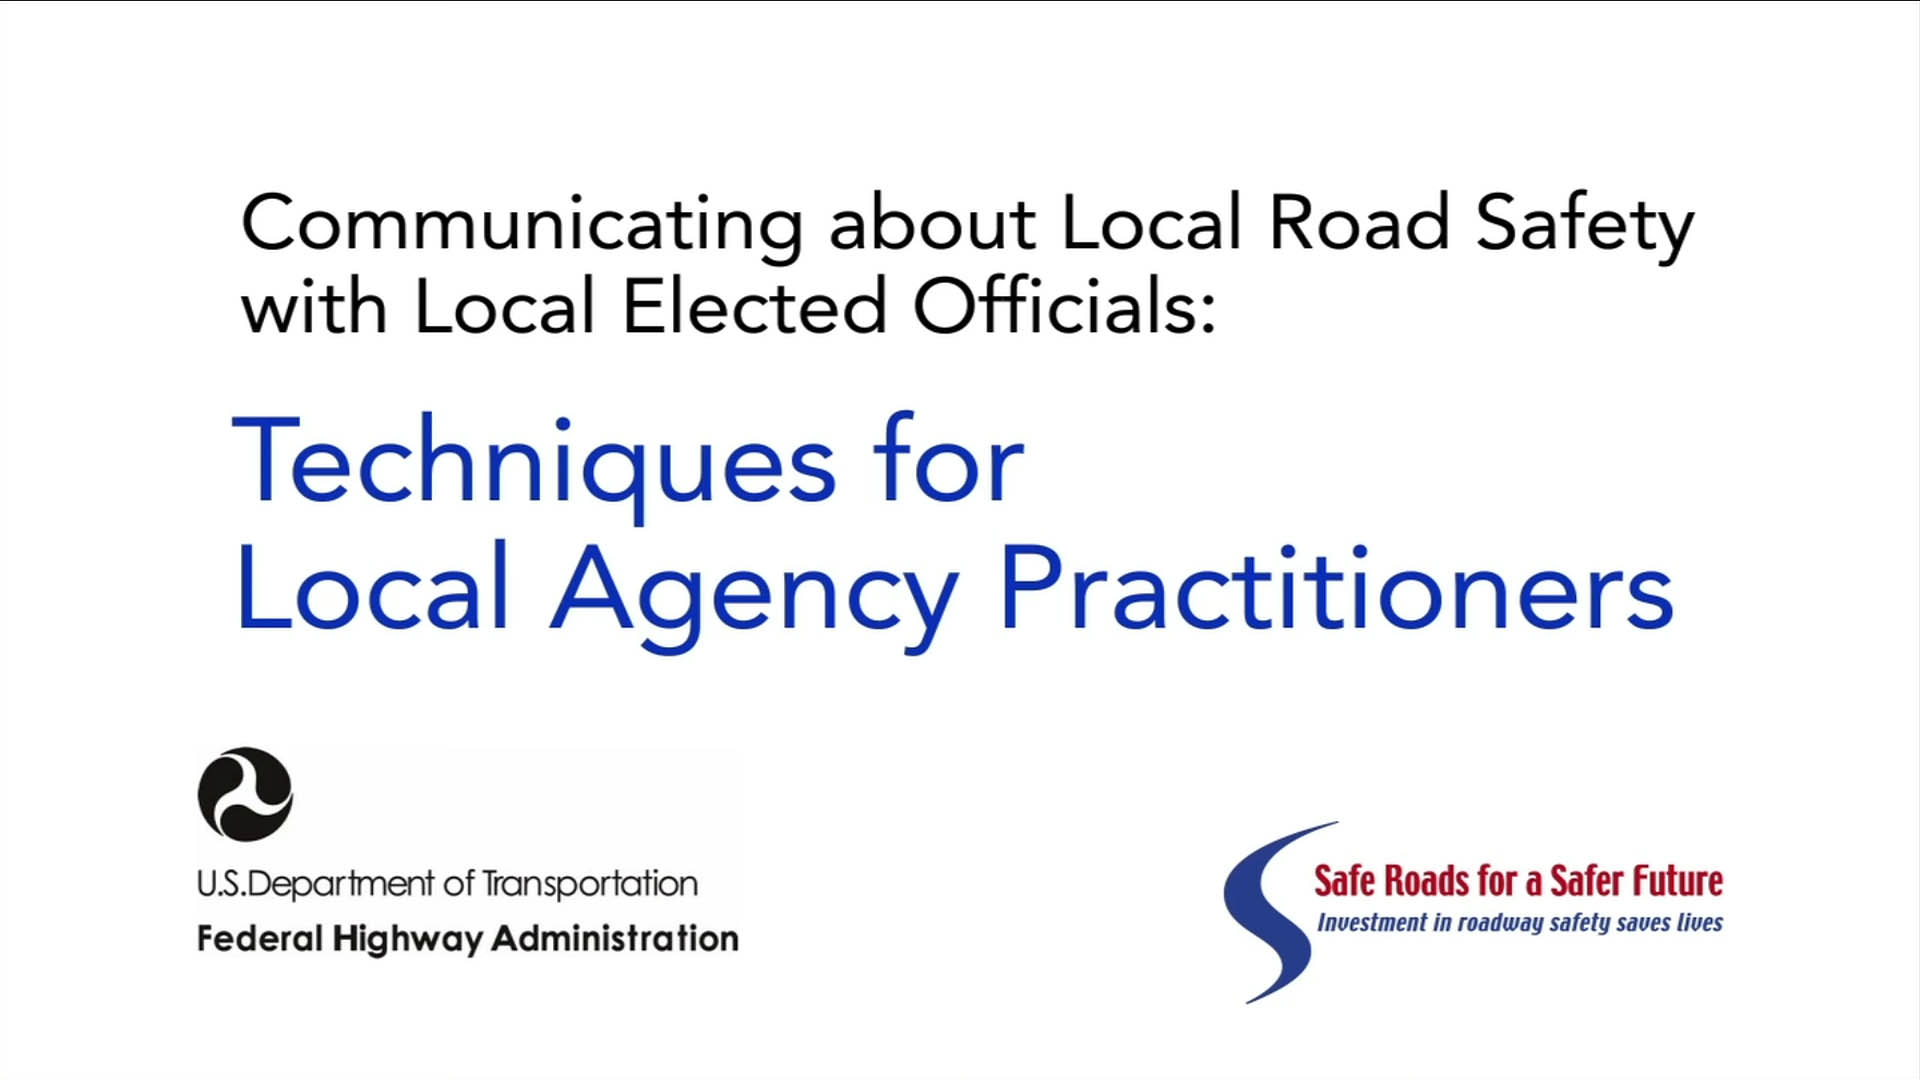 Communicating About Local Road Safety with Local Elected Officials: Techniques for Practitioners Video Thumbnail